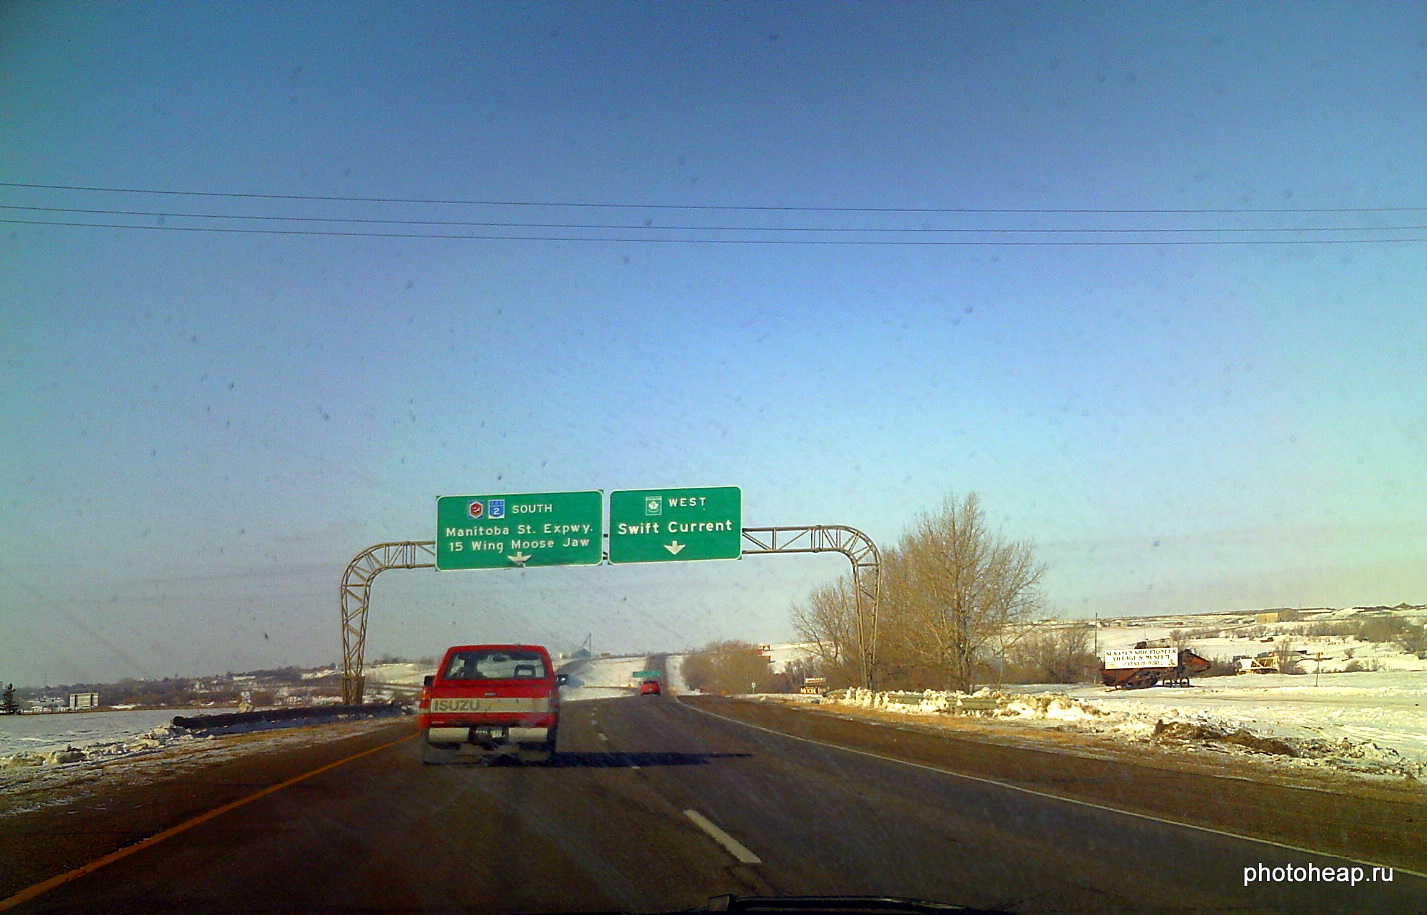 Canadian road signs - Manitoba Swift Current